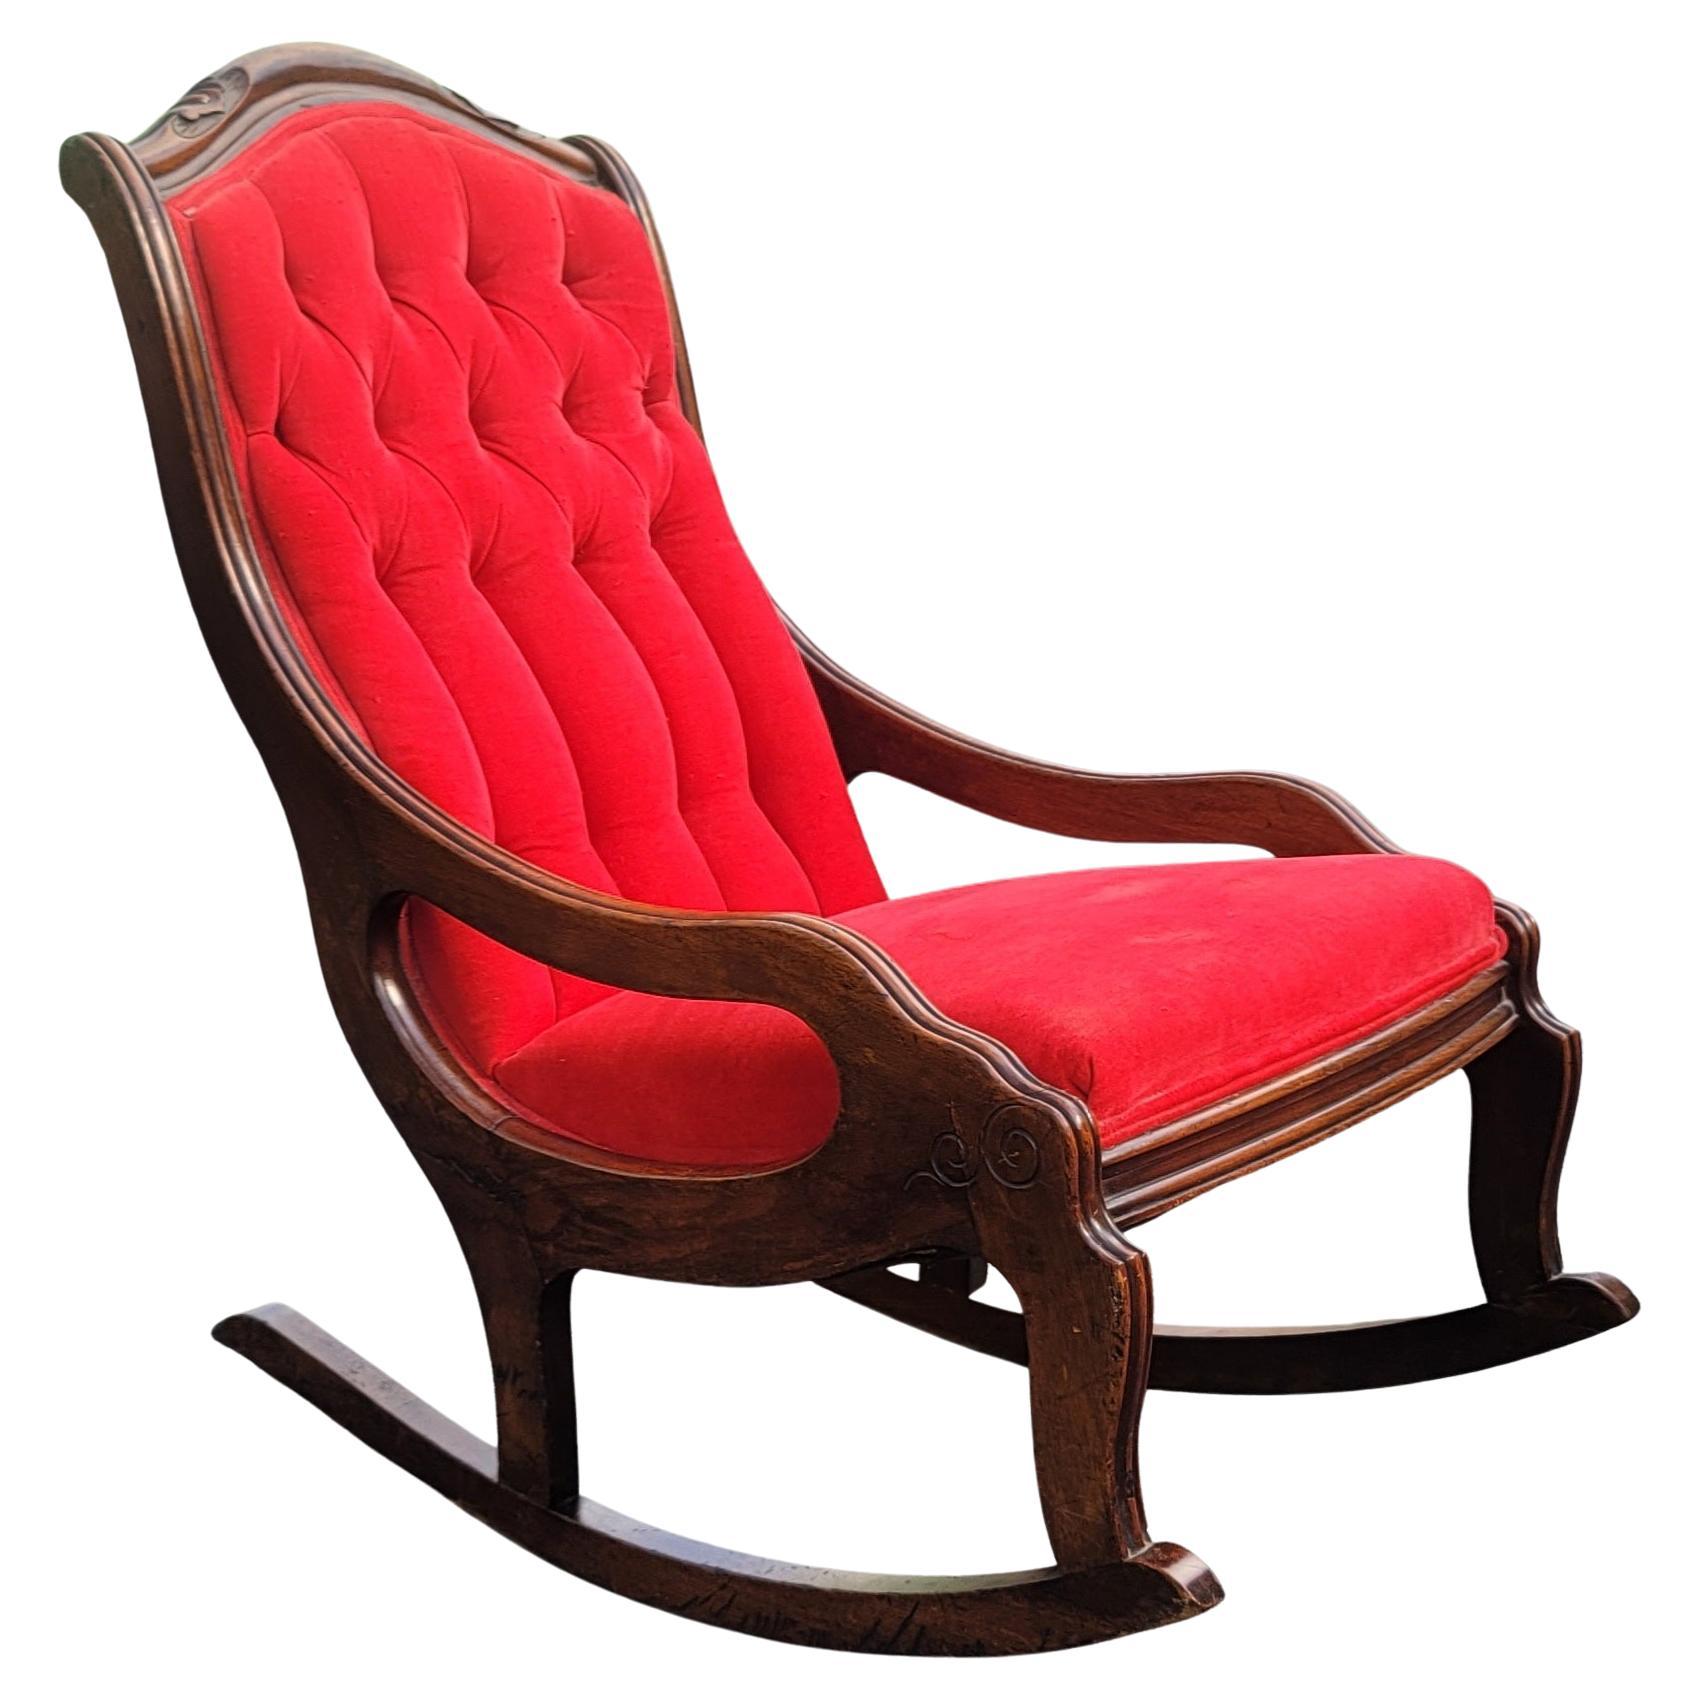 Victorian Mahogany and Tufted Velvet Upholstered Rocking Chair, Circa 1920s